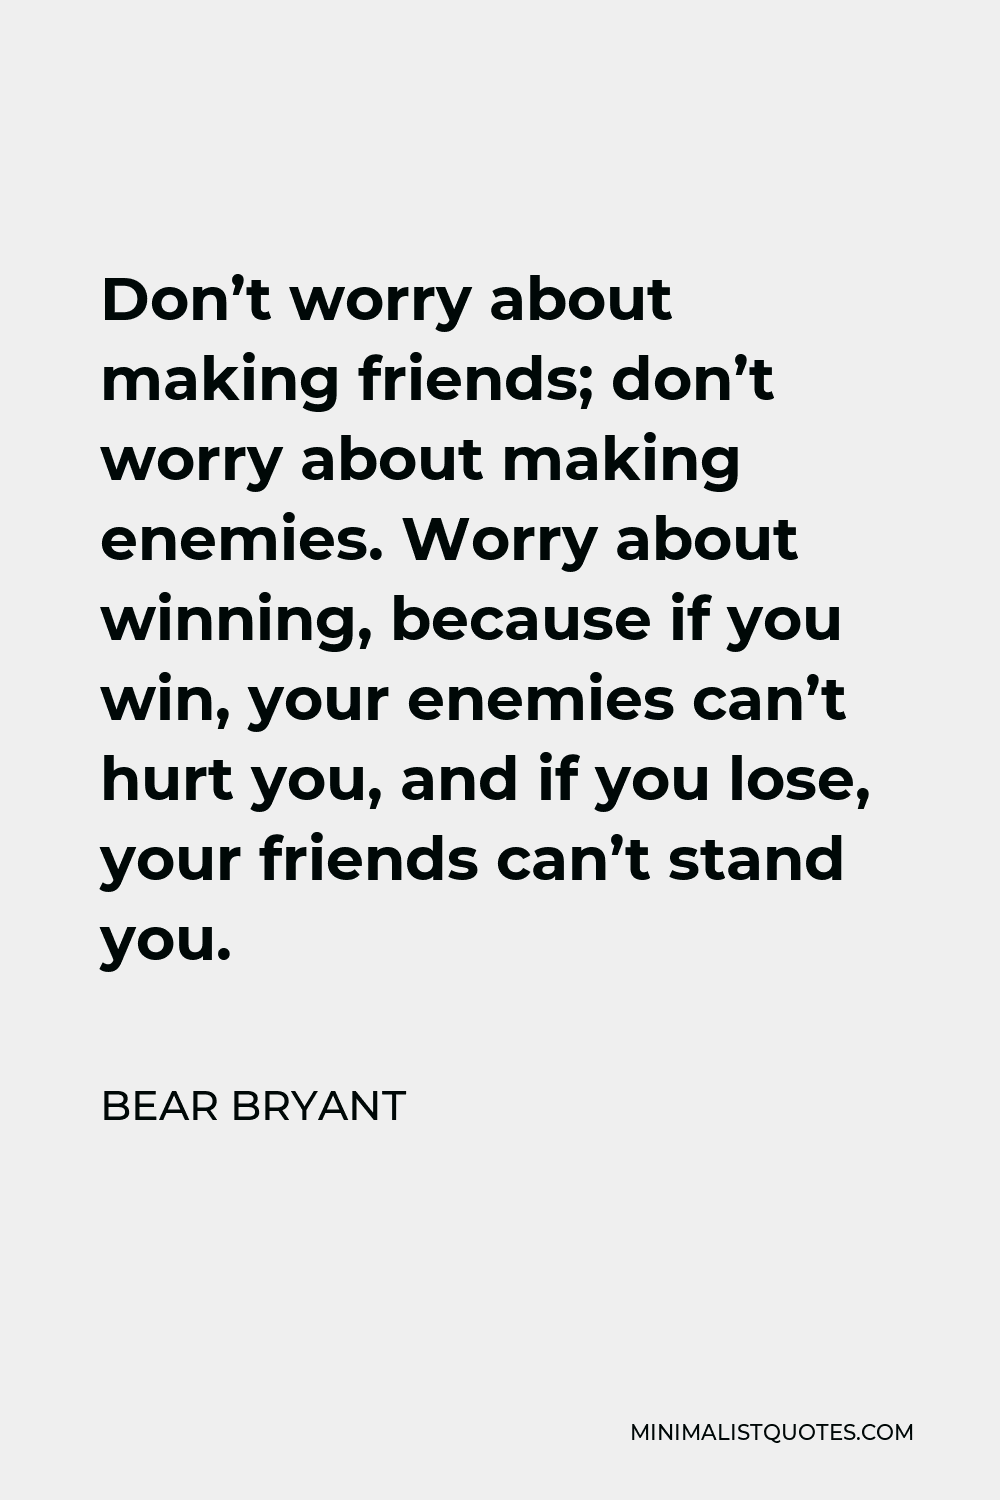 Bear Bryant Quote - Don’t worry about making friends; don’t worry about making enemies. Worry about winning, because if you win, your enemies can’t hurt you, and if you lose, your friends can’t stand you.